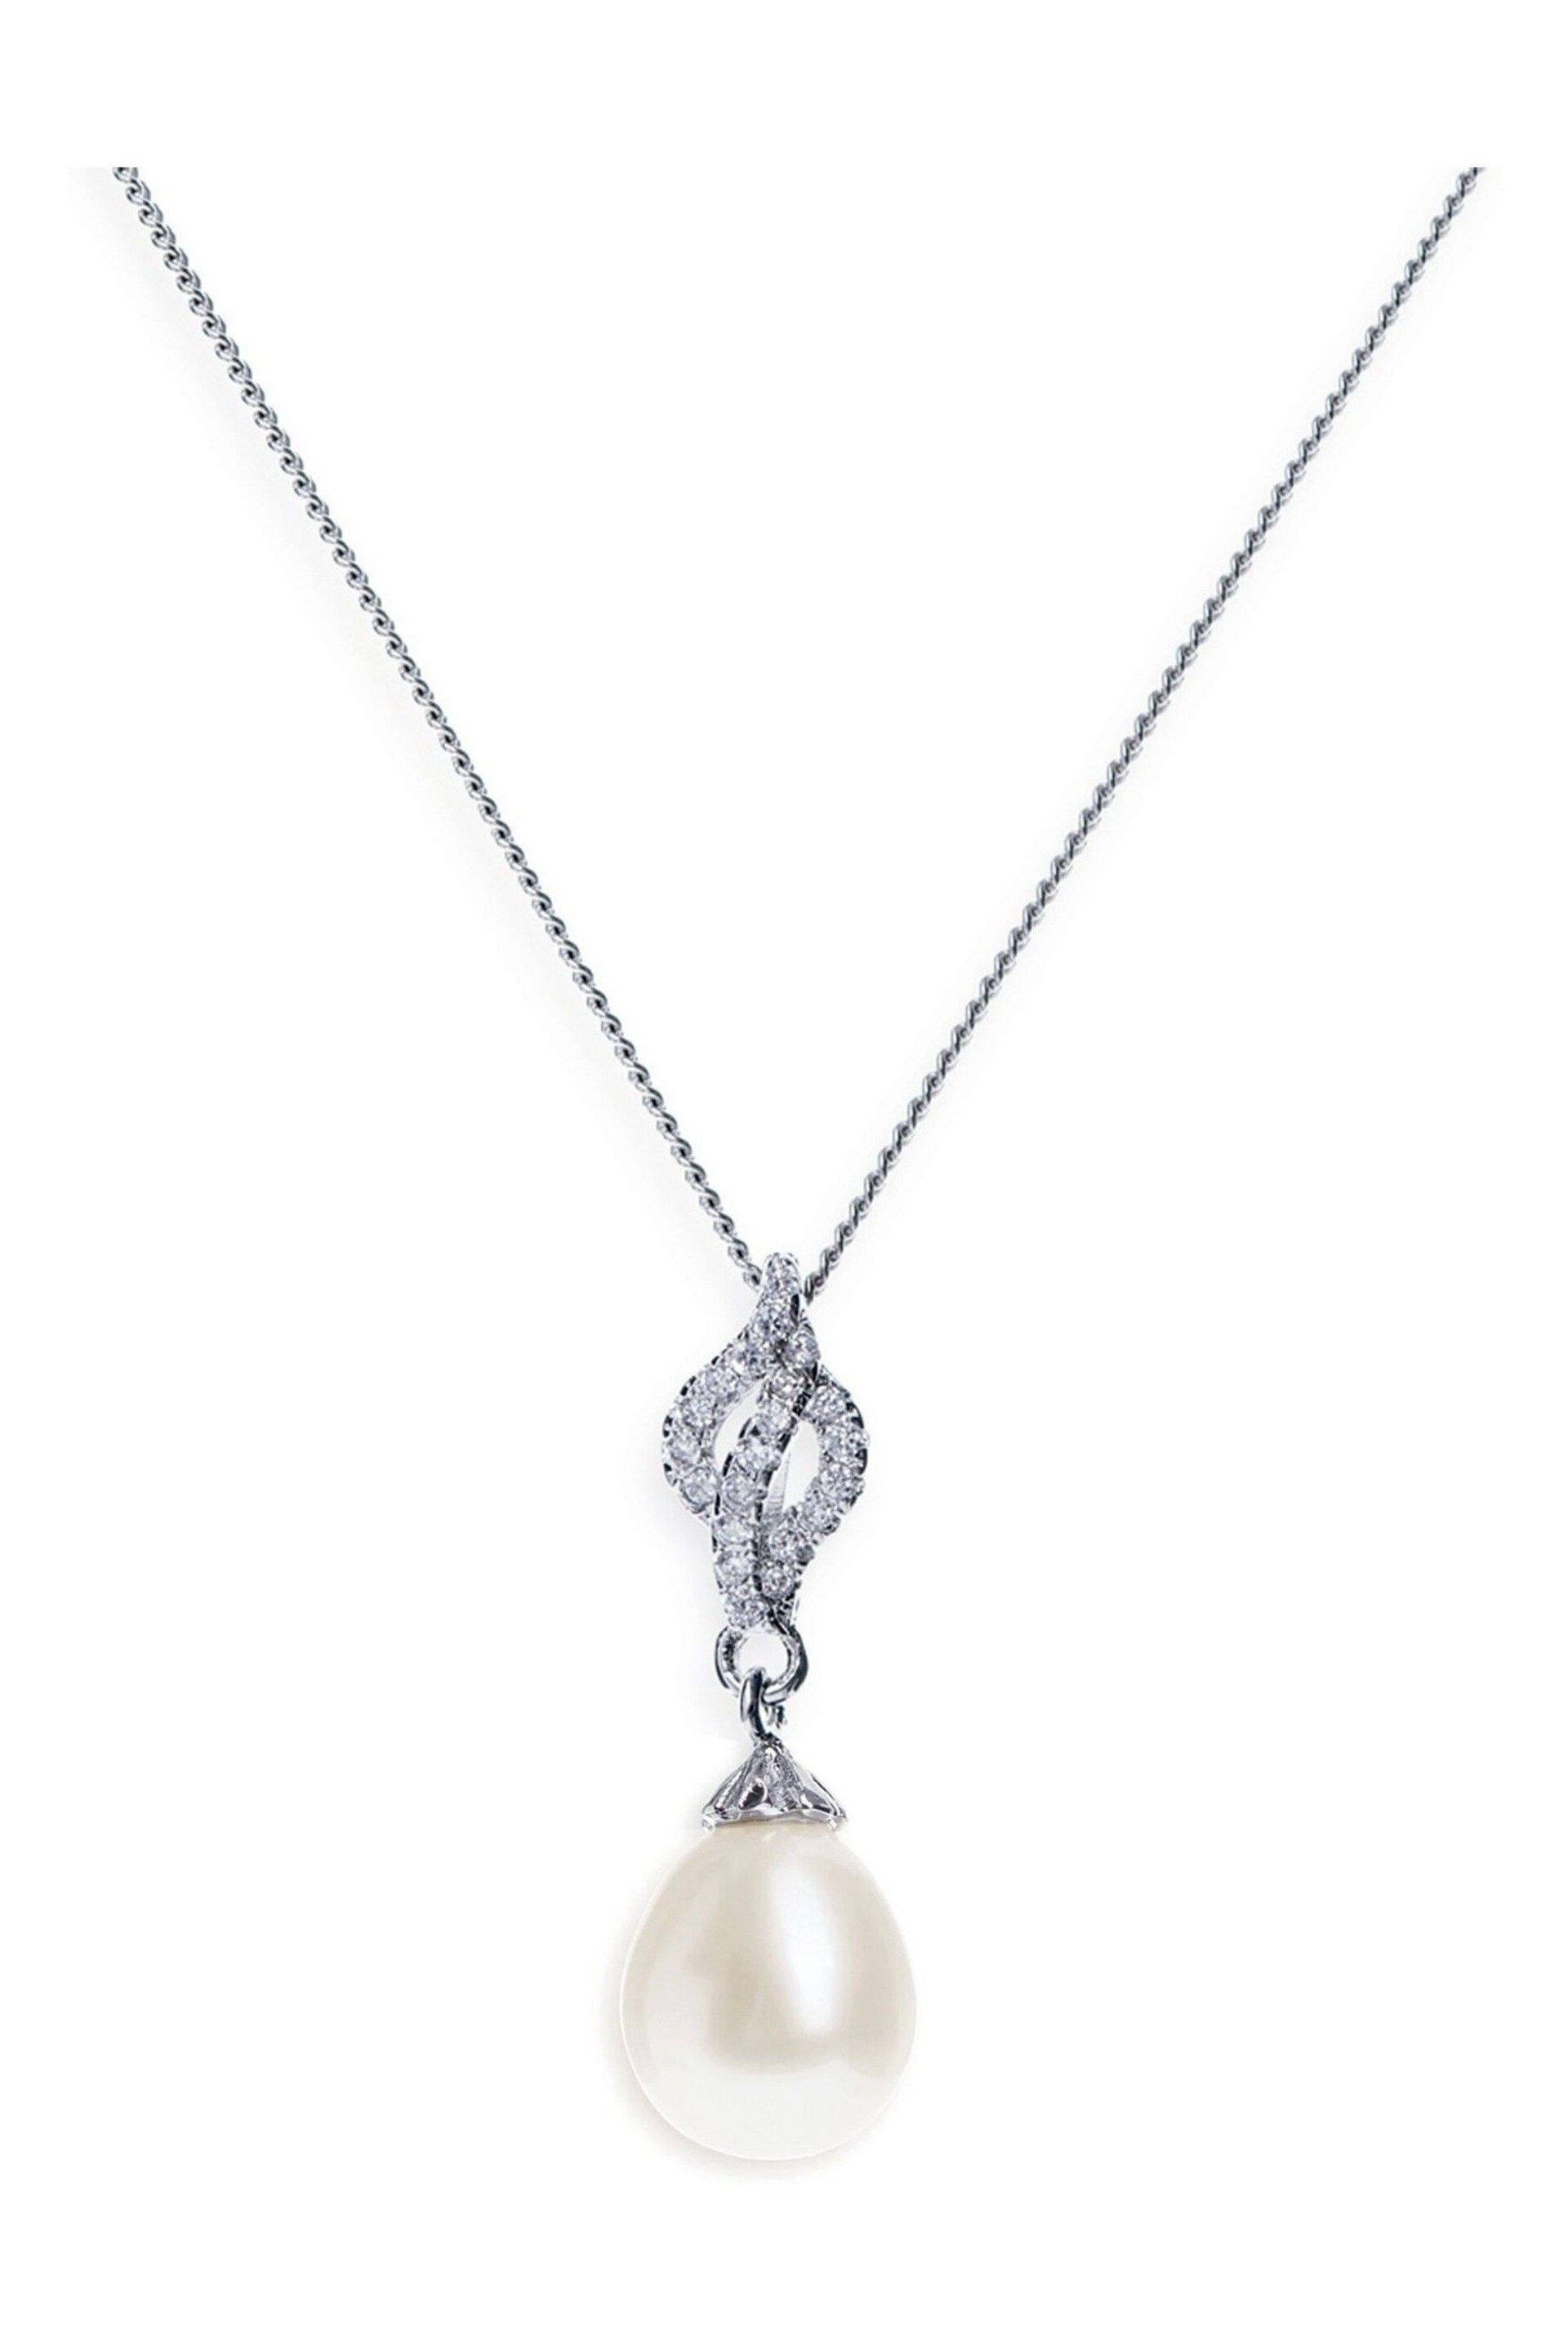 Ivory & Co Silver Lisbon Crystal And Pearl Romantic Pendant - Image 1 of 5